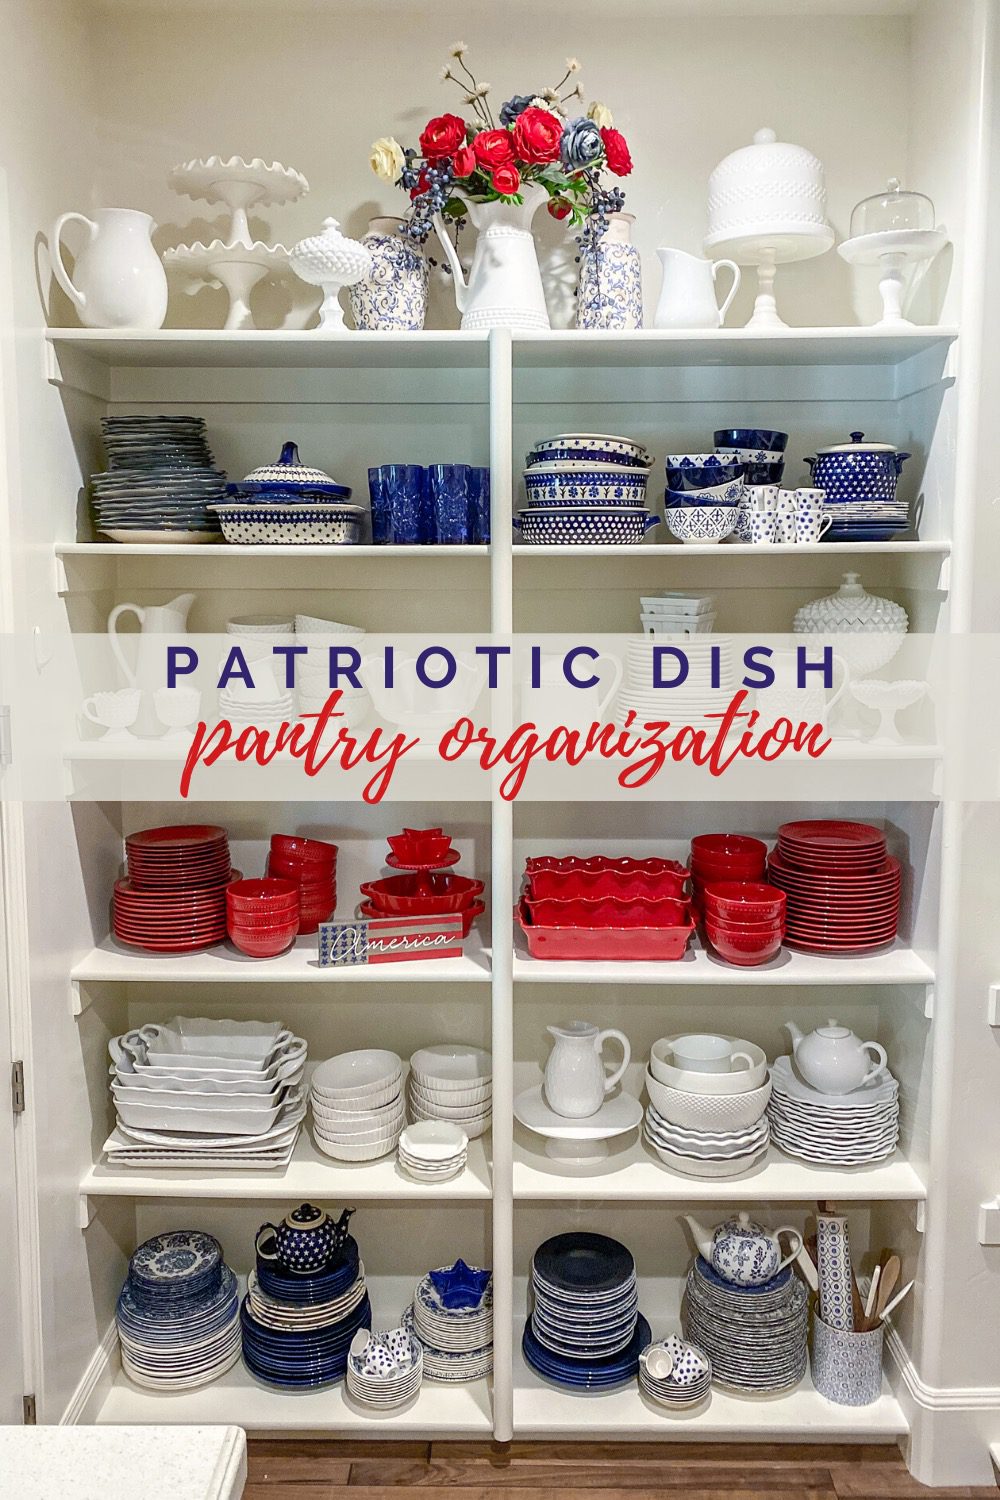 Sharing my red, white, and blue Patriotic Dish Pantry Organization today for an easy organization project to do in the kitchen.